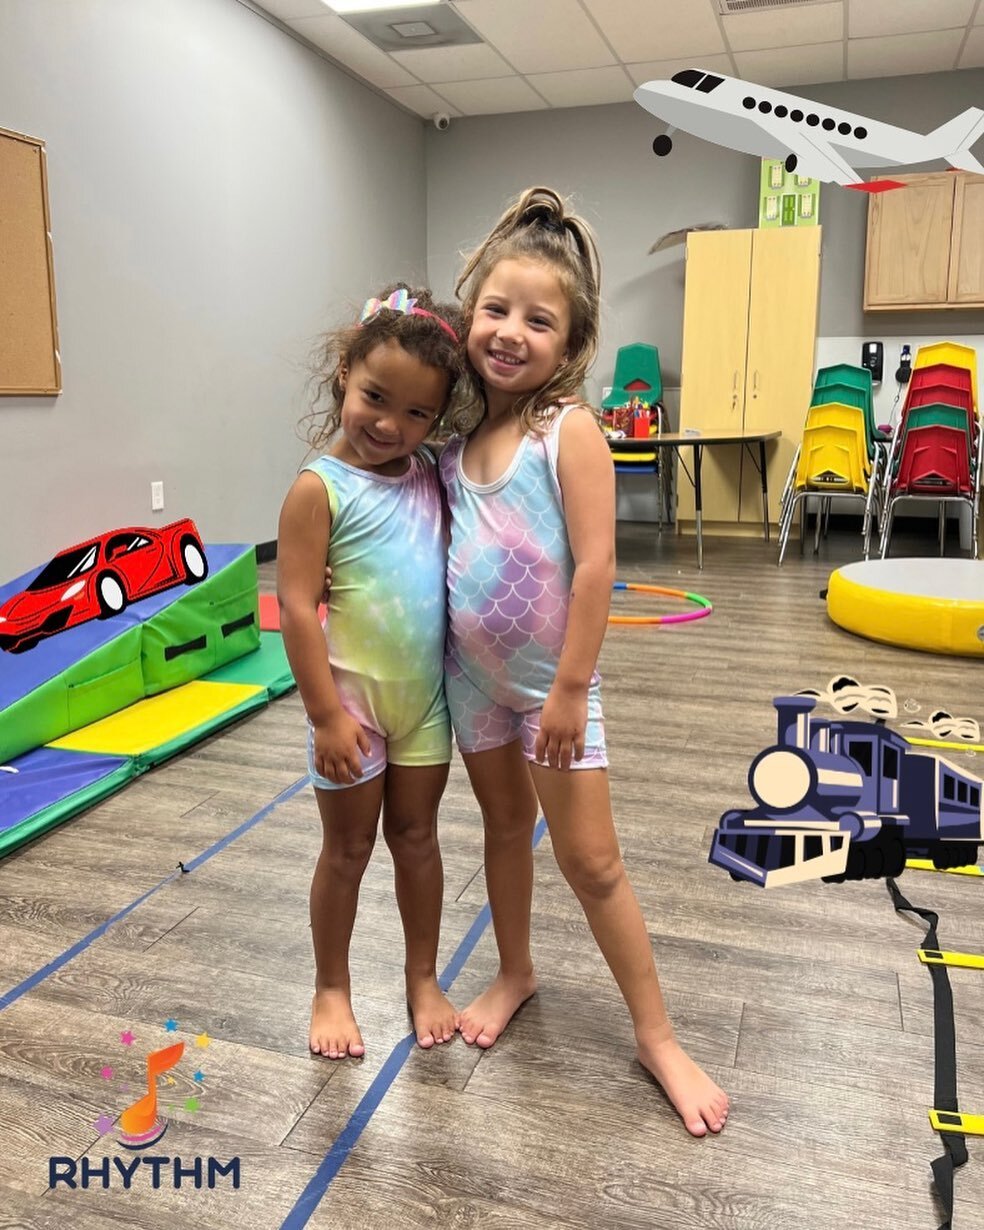 At Rhythm we&rsquo;re really BIG on using our Imagination! 🎶☁️✨

Don&rsquo;t miss out on our 🍂FALL SESSION,🍂SIGN UP TODAY!! ✅ ⭐️WWW.RHYTHMDANCEANDGYMNASTICS.COM⭐️

#fall #enroll #signup #gymnasticsclasses #rhythmgymnastics #preschoolgymnastics #gr